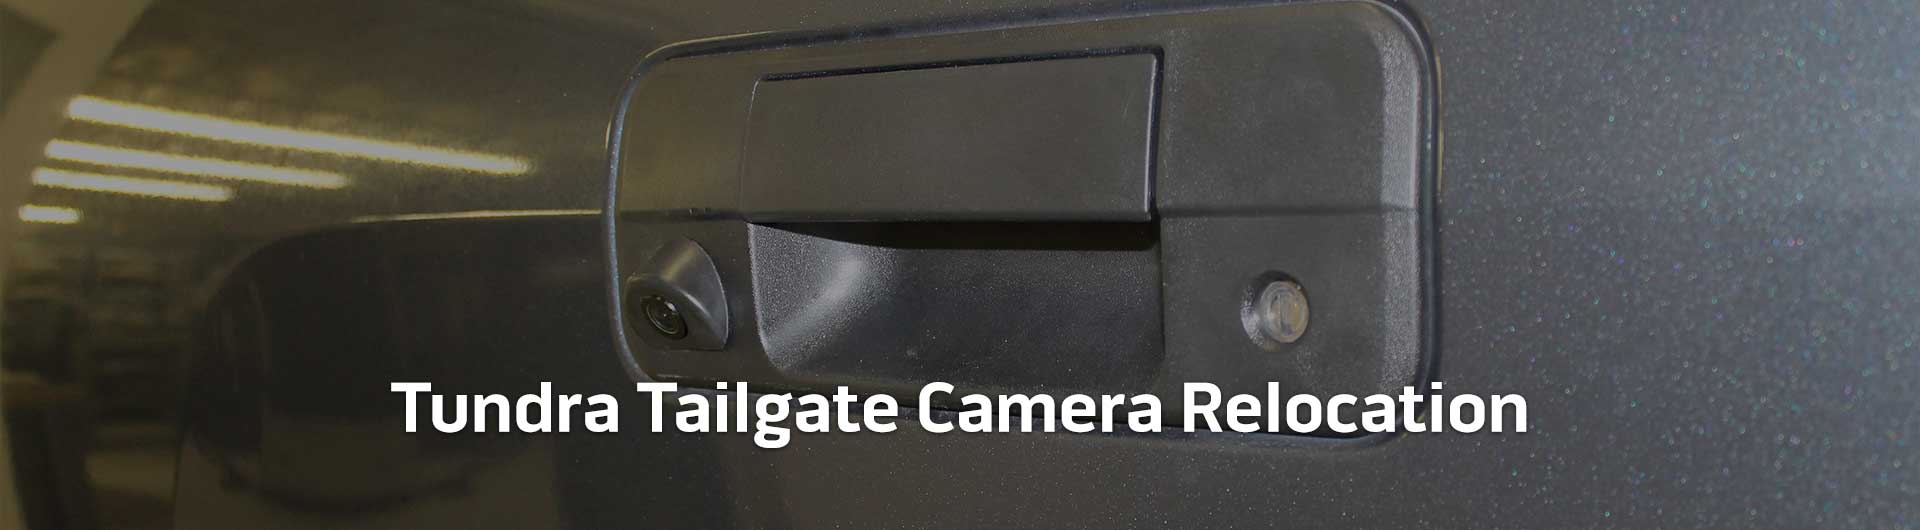 An image showing the tailgate handle camera of a Toyota Tundra. The image has text that reads Toyota Tundra Tailgate Camera Relocation.